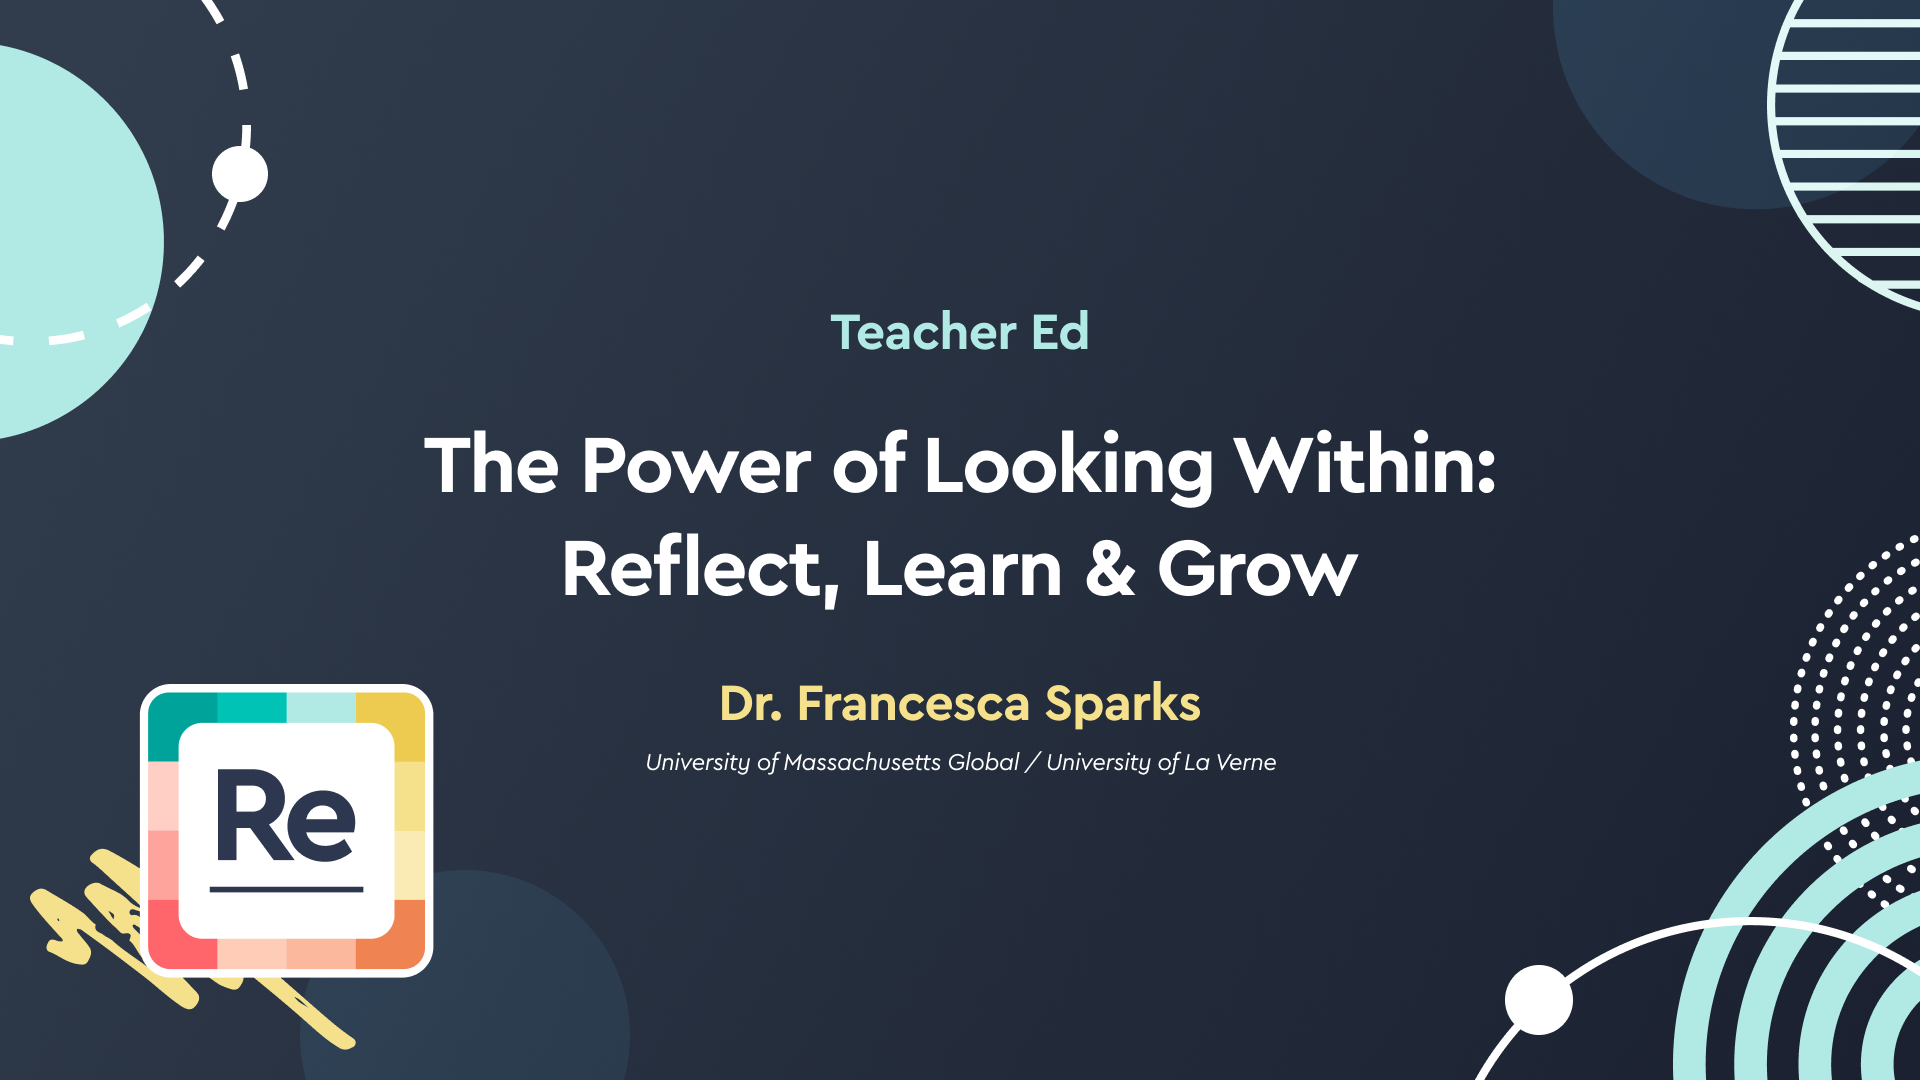 The Power of Looking Within: Reflect, Learn & Grow